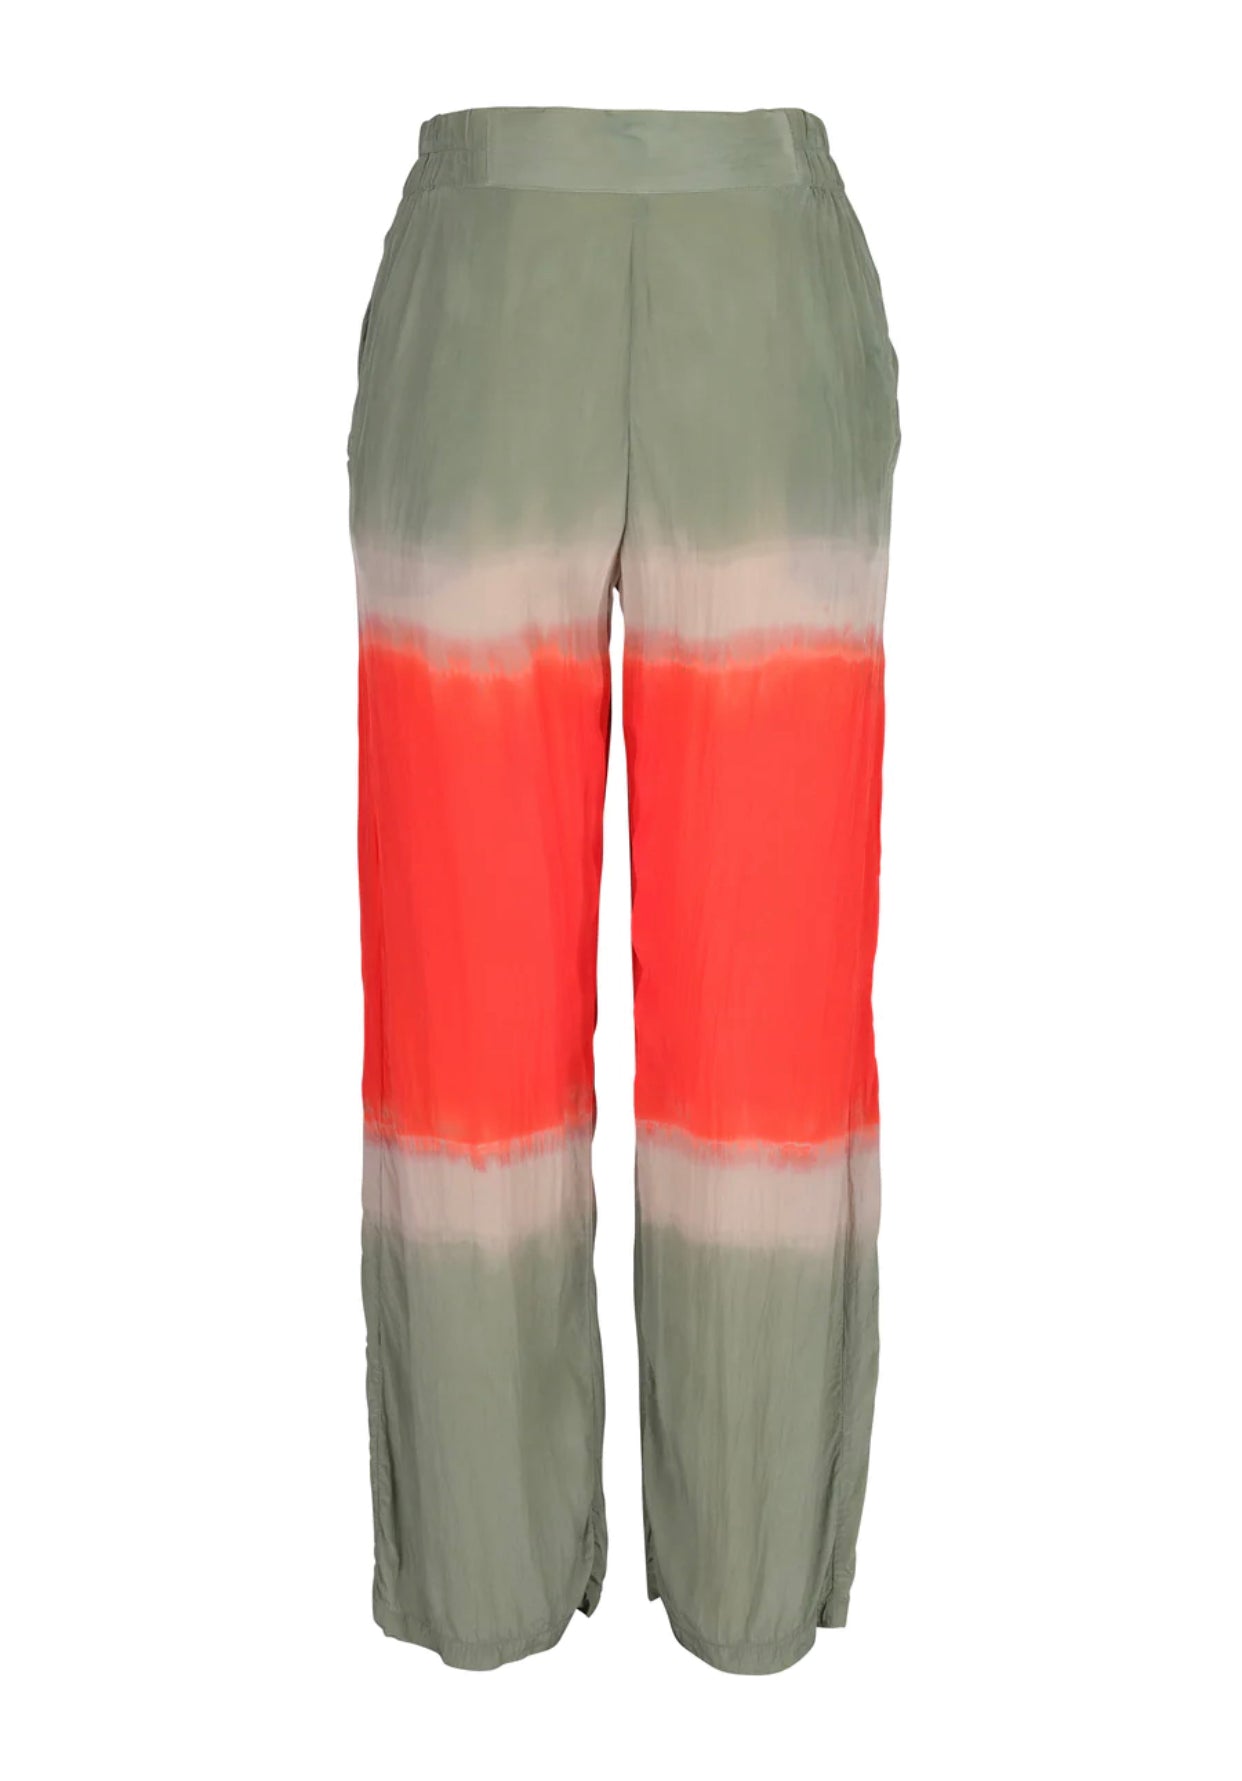 Elina Tina Trouser in Army Mix